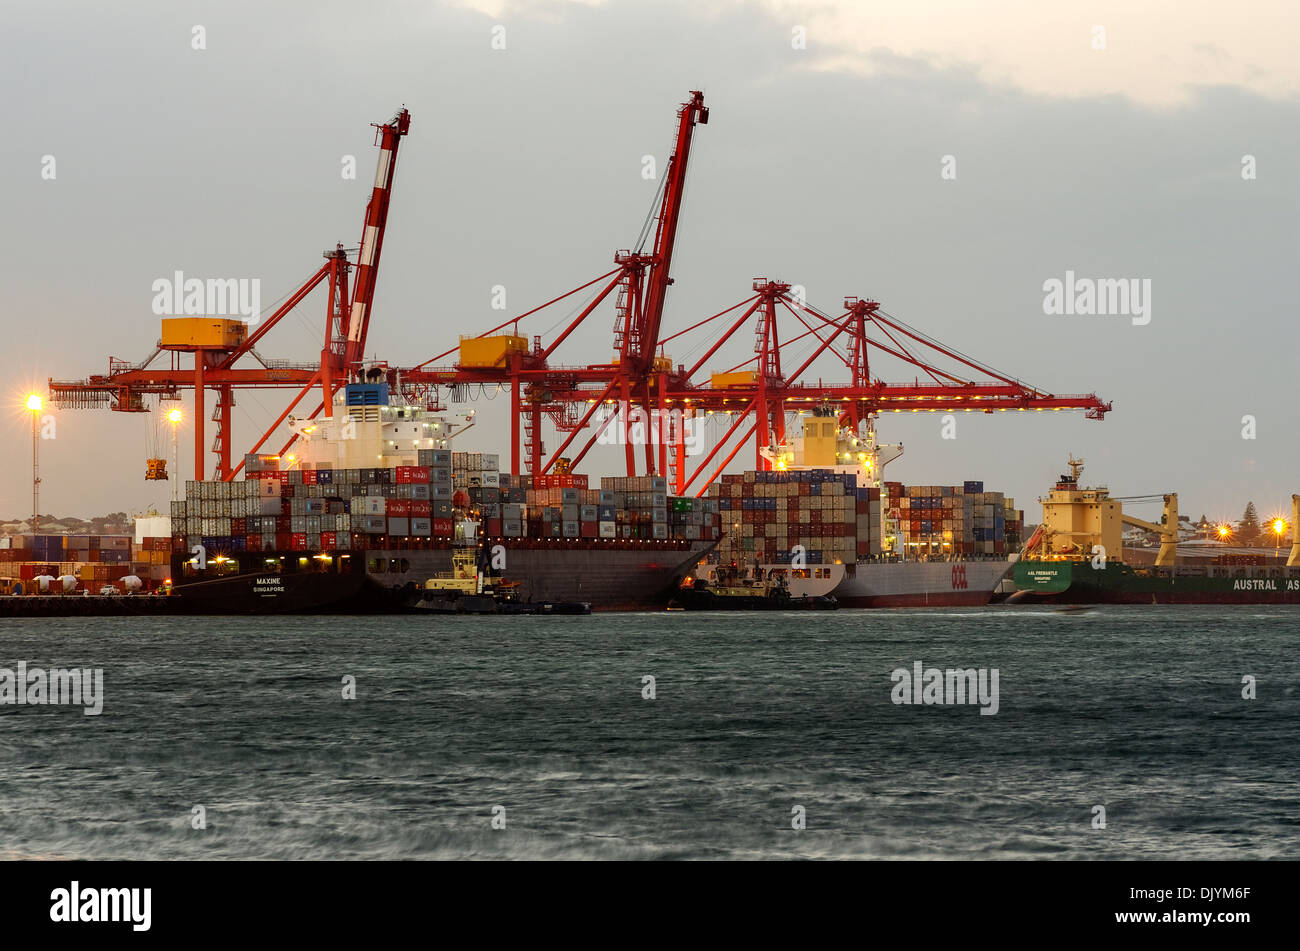 Container ships berthing at Fremantle port near Perth, Western Australia. Stock Photo